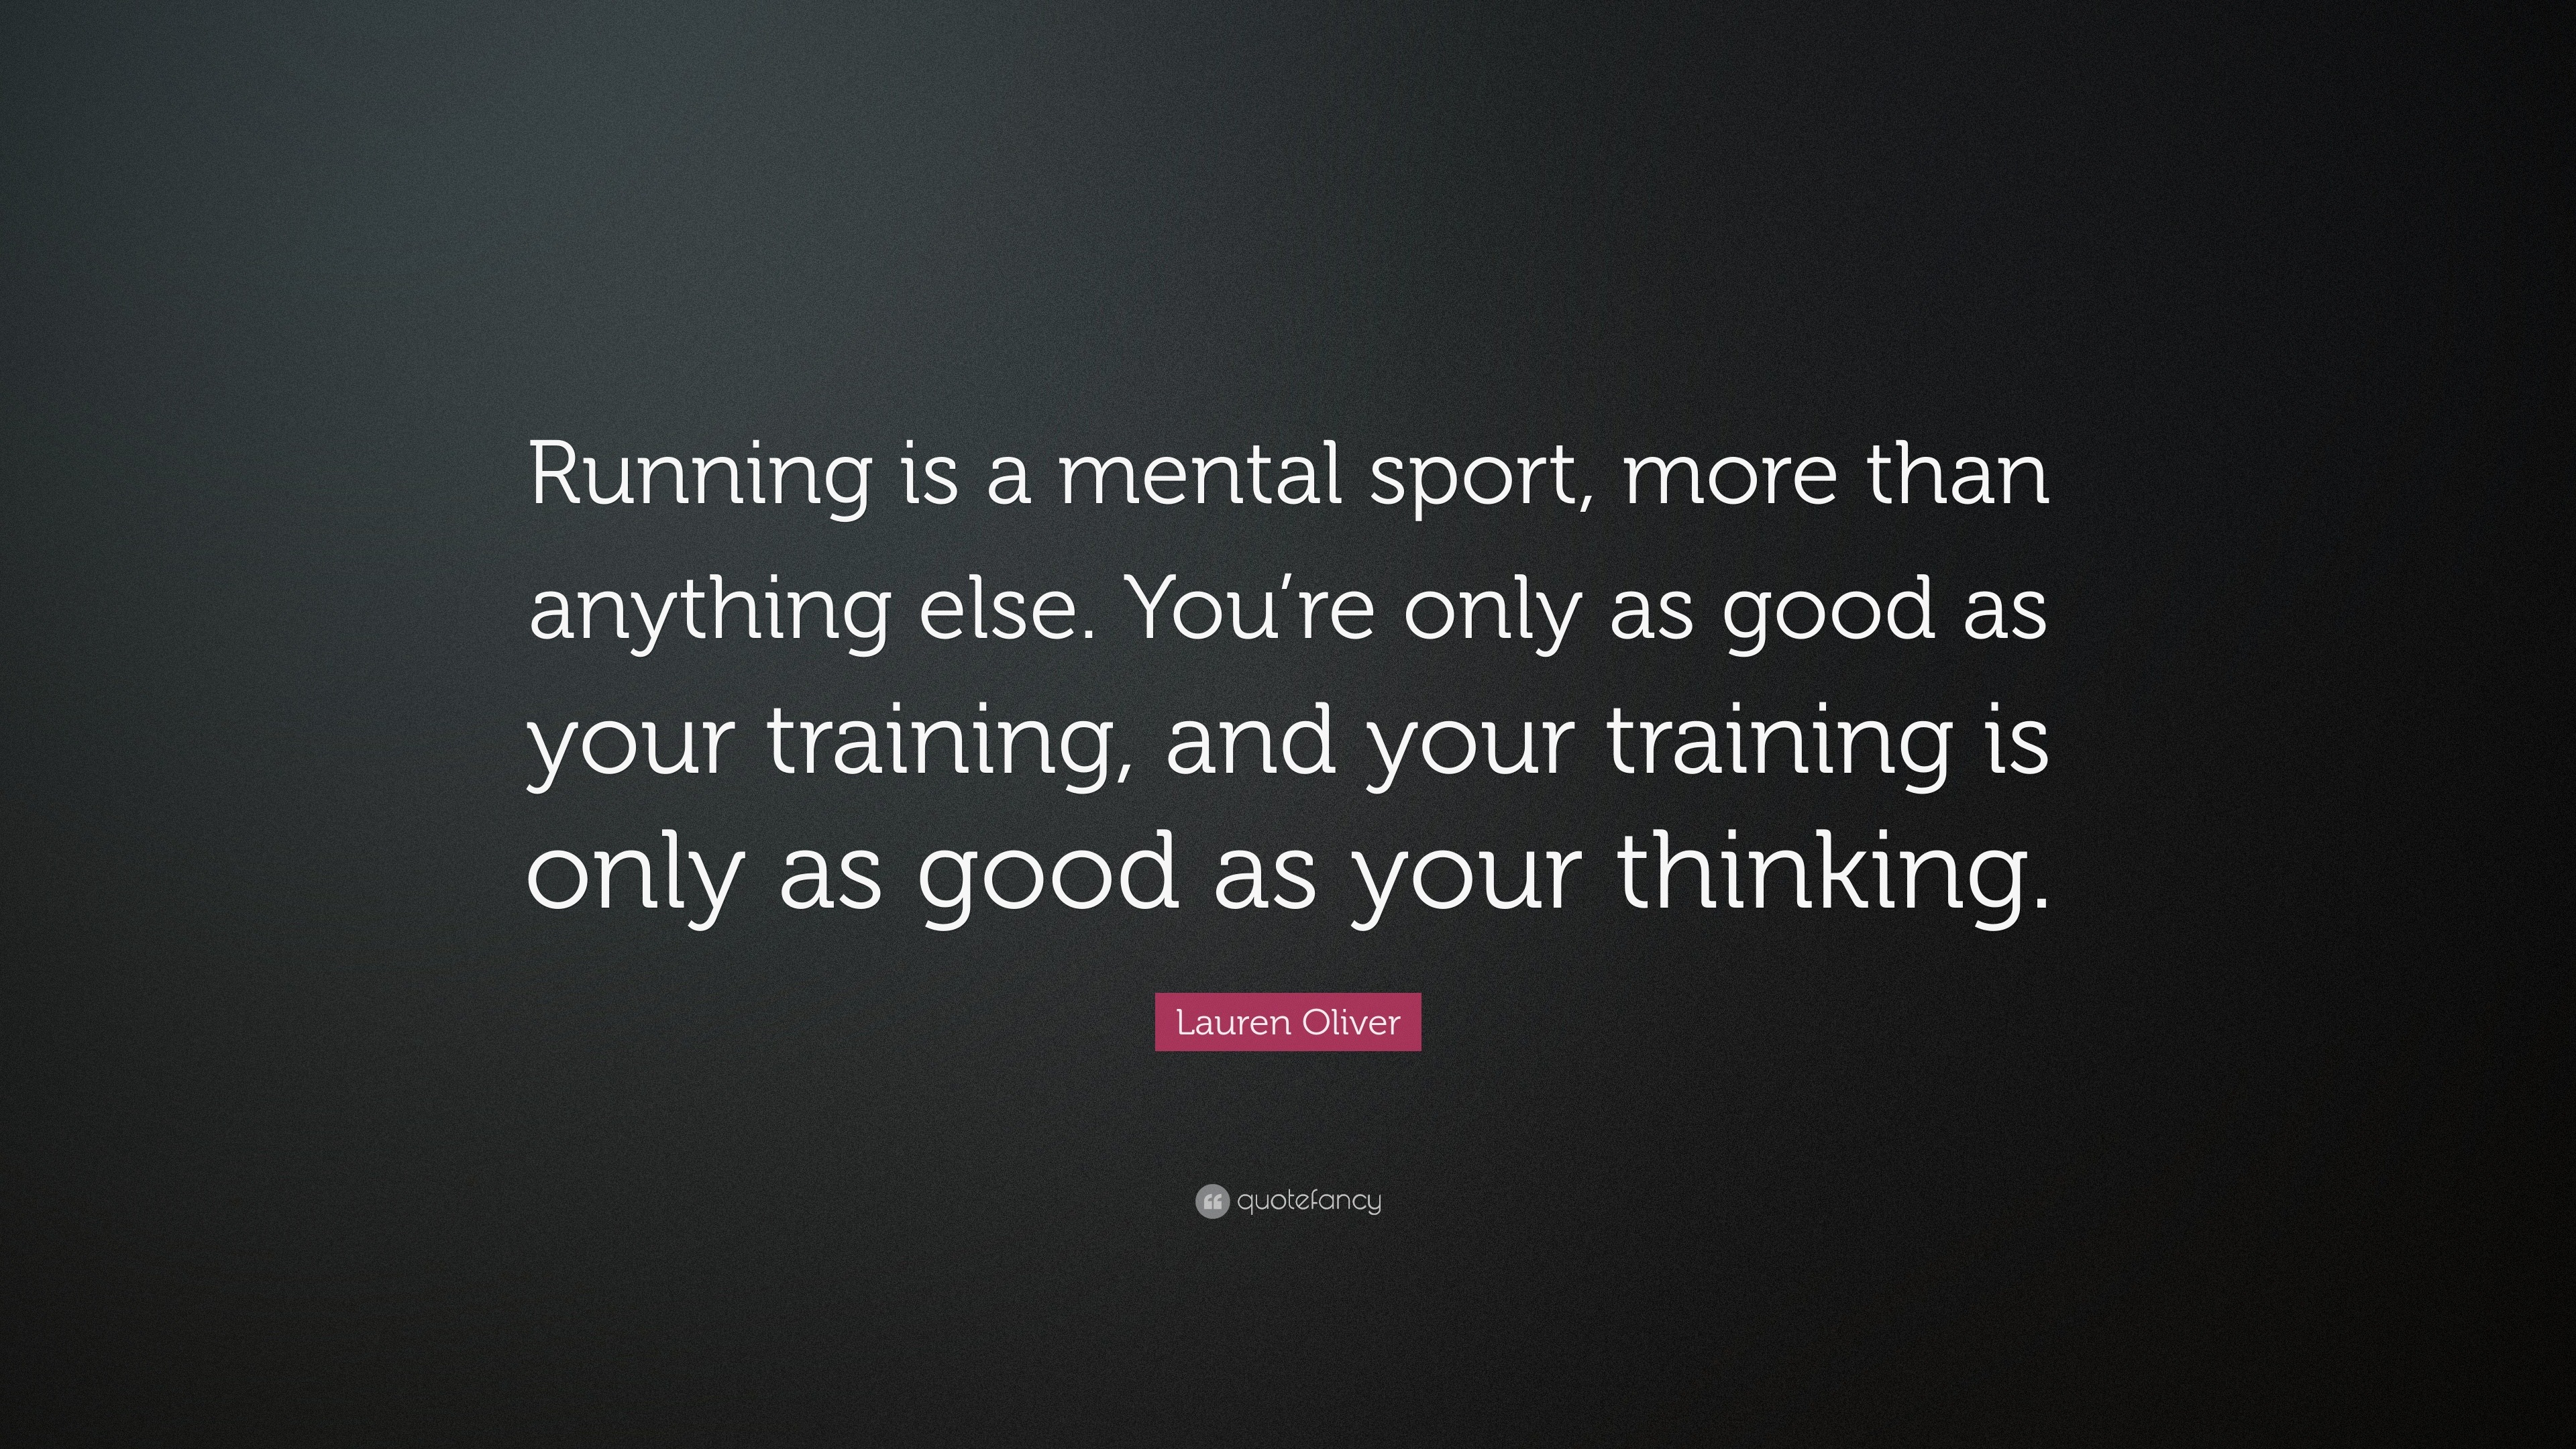 Lauren Oliver Quote: “Running is a mental sport, more anything else. You're only as good as your training, and your training is only as g...”